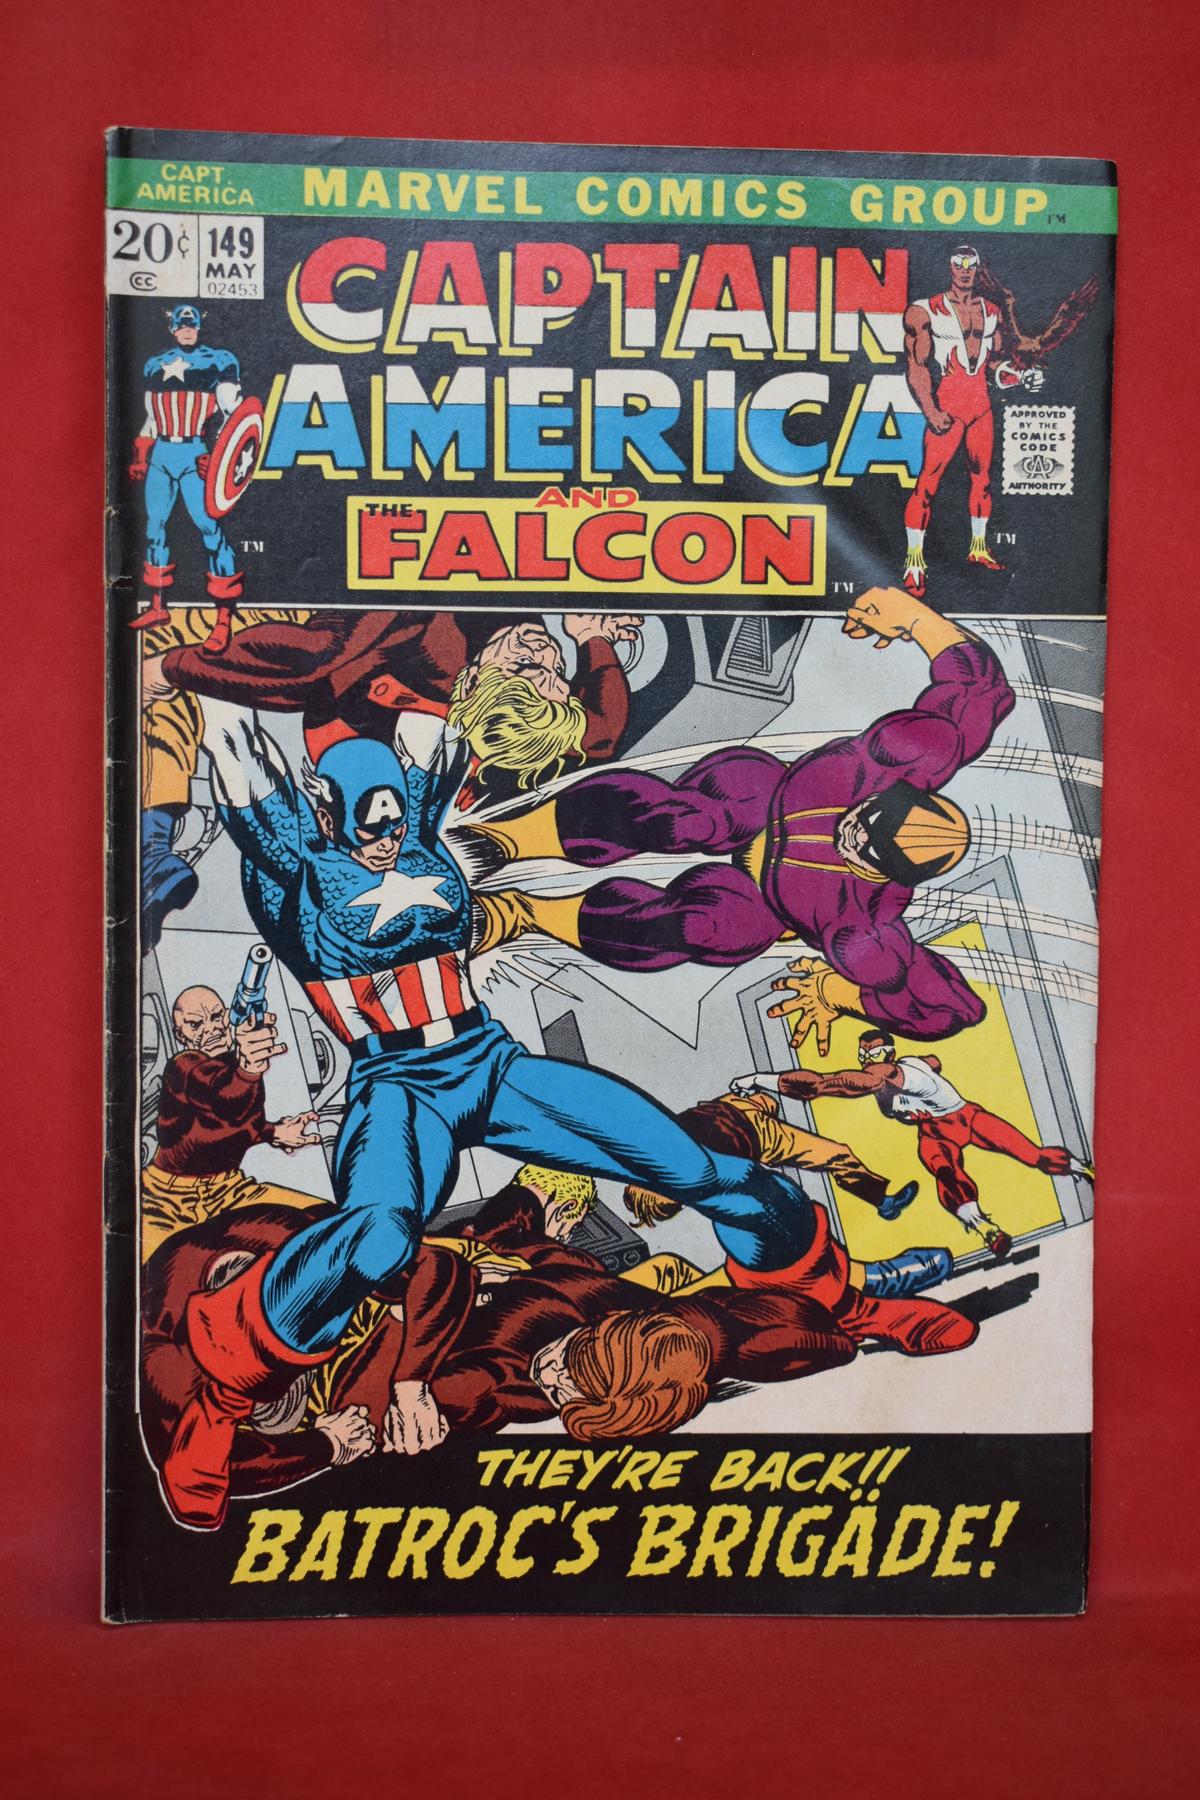 CAPTAIN AMERICA #149 | ALL THE COLORS OF EVIL - GIL KANE - 1972 | *INTERIOR PAGE TORN*